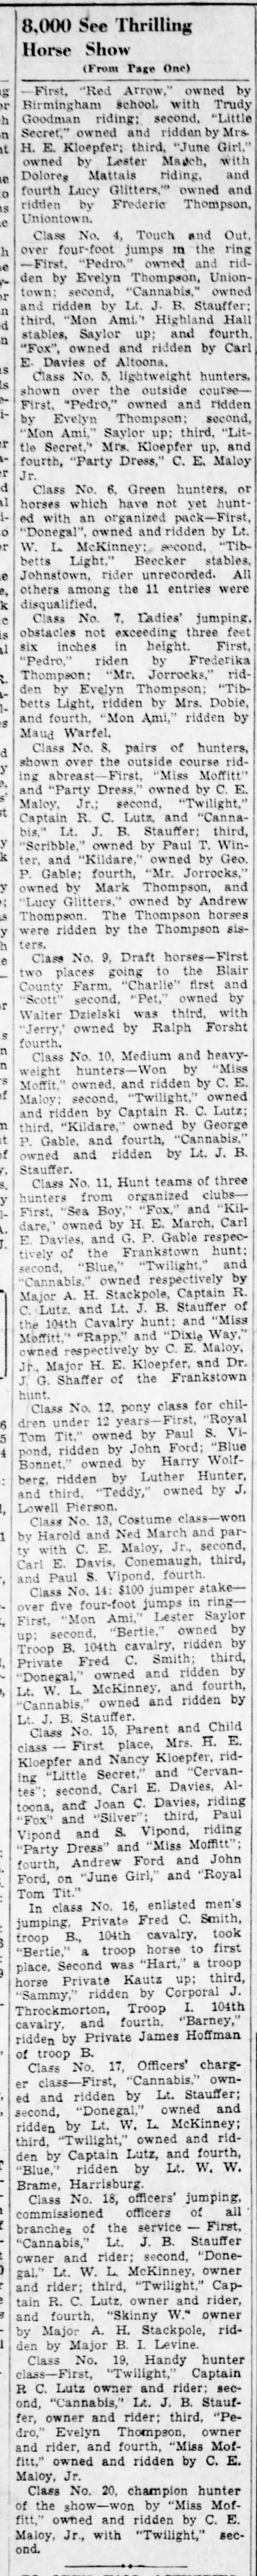 Part 2-Thrilling Horse Show-8 Sept 1936